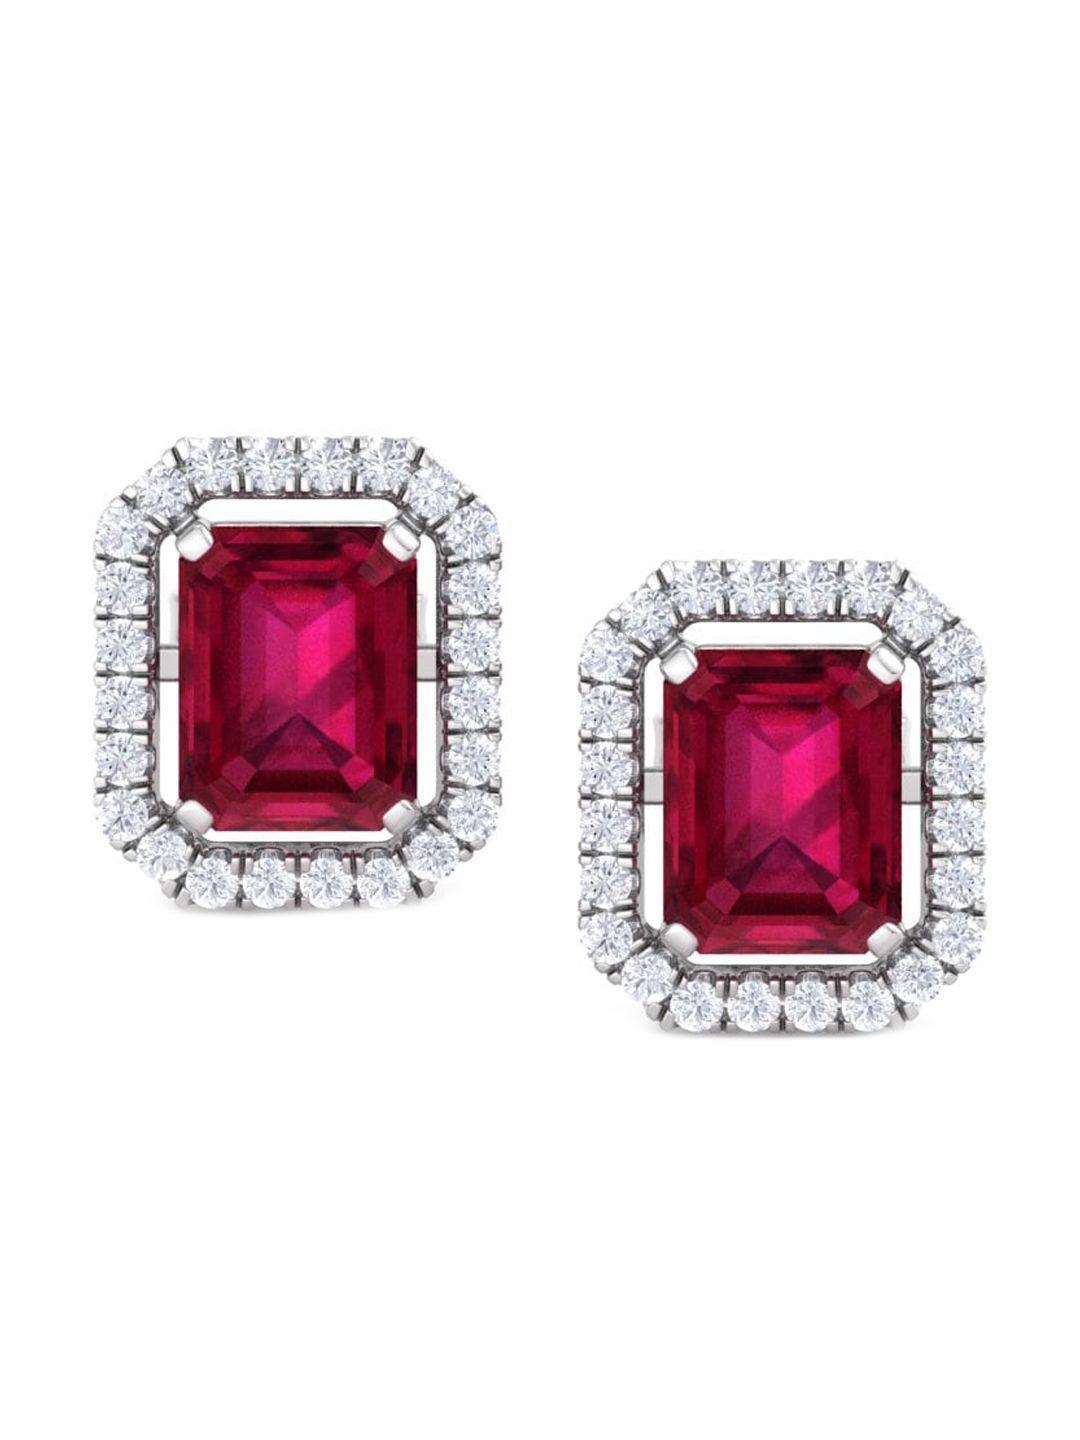 inddus jewels rhodium-plated 925 sterling silver cubic zirconia studded studs earrings